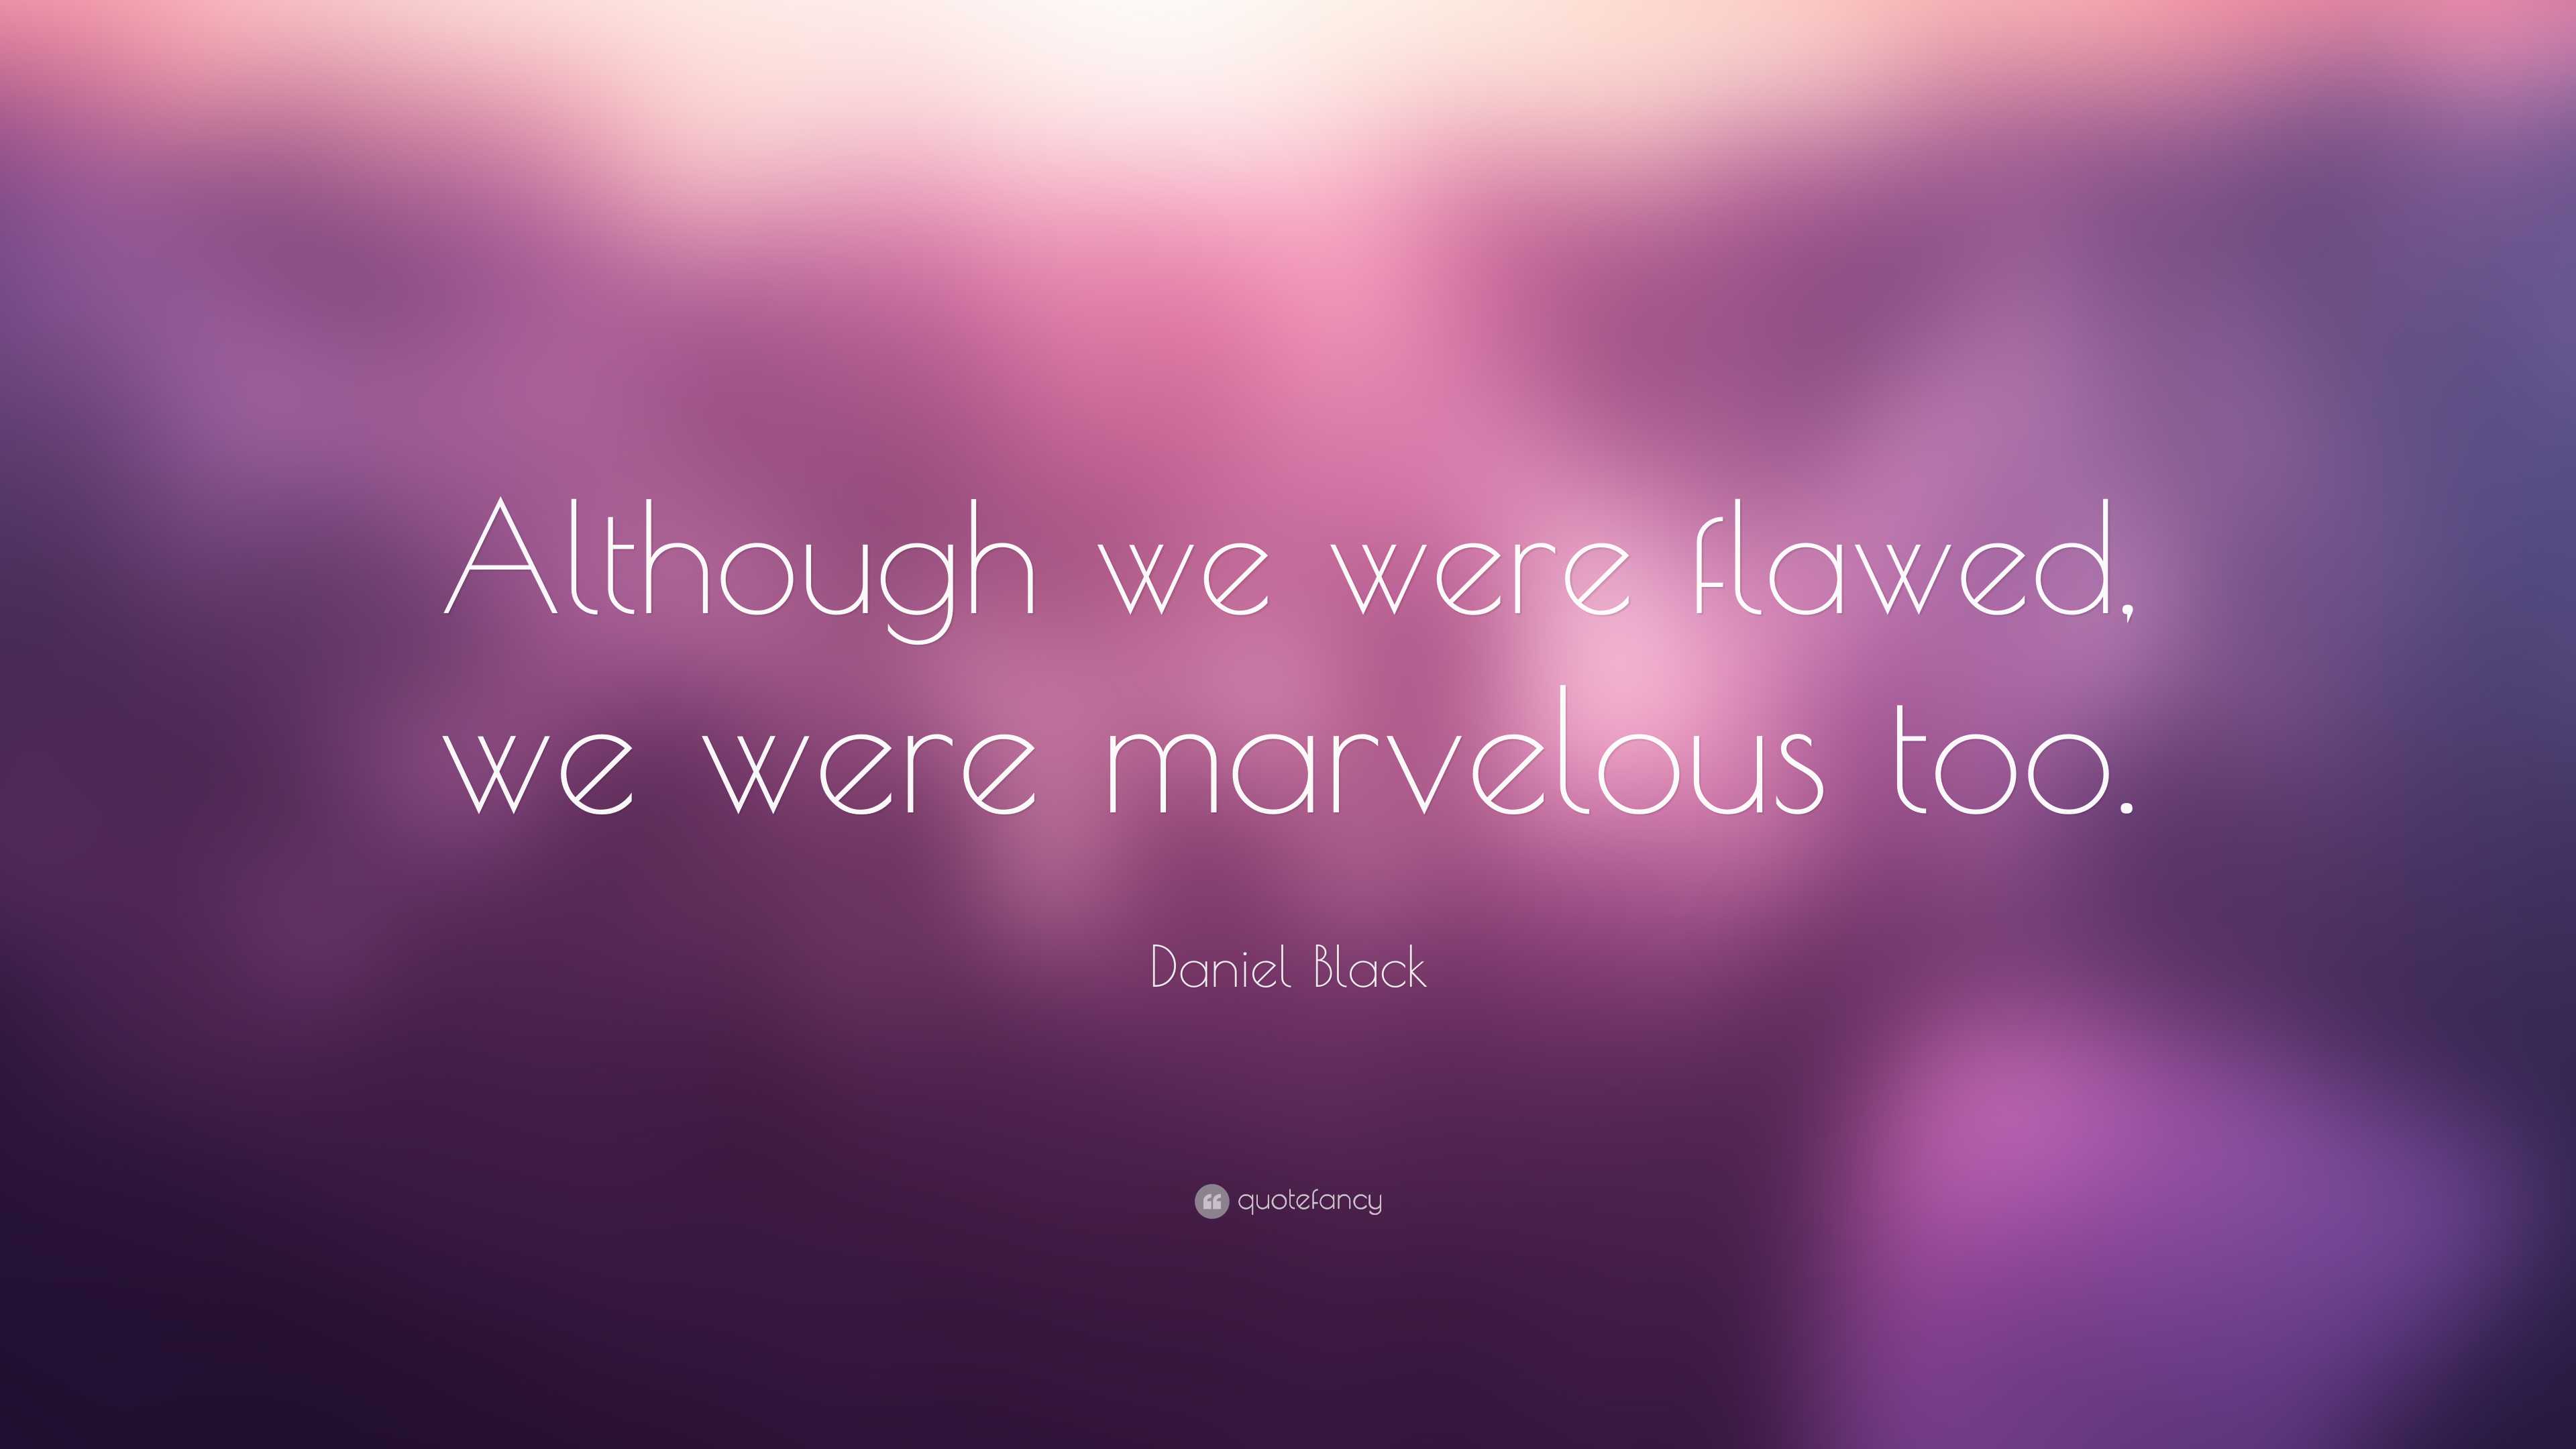 Daniel Black Quote: “Although we were flawed, we were marvelous too.”